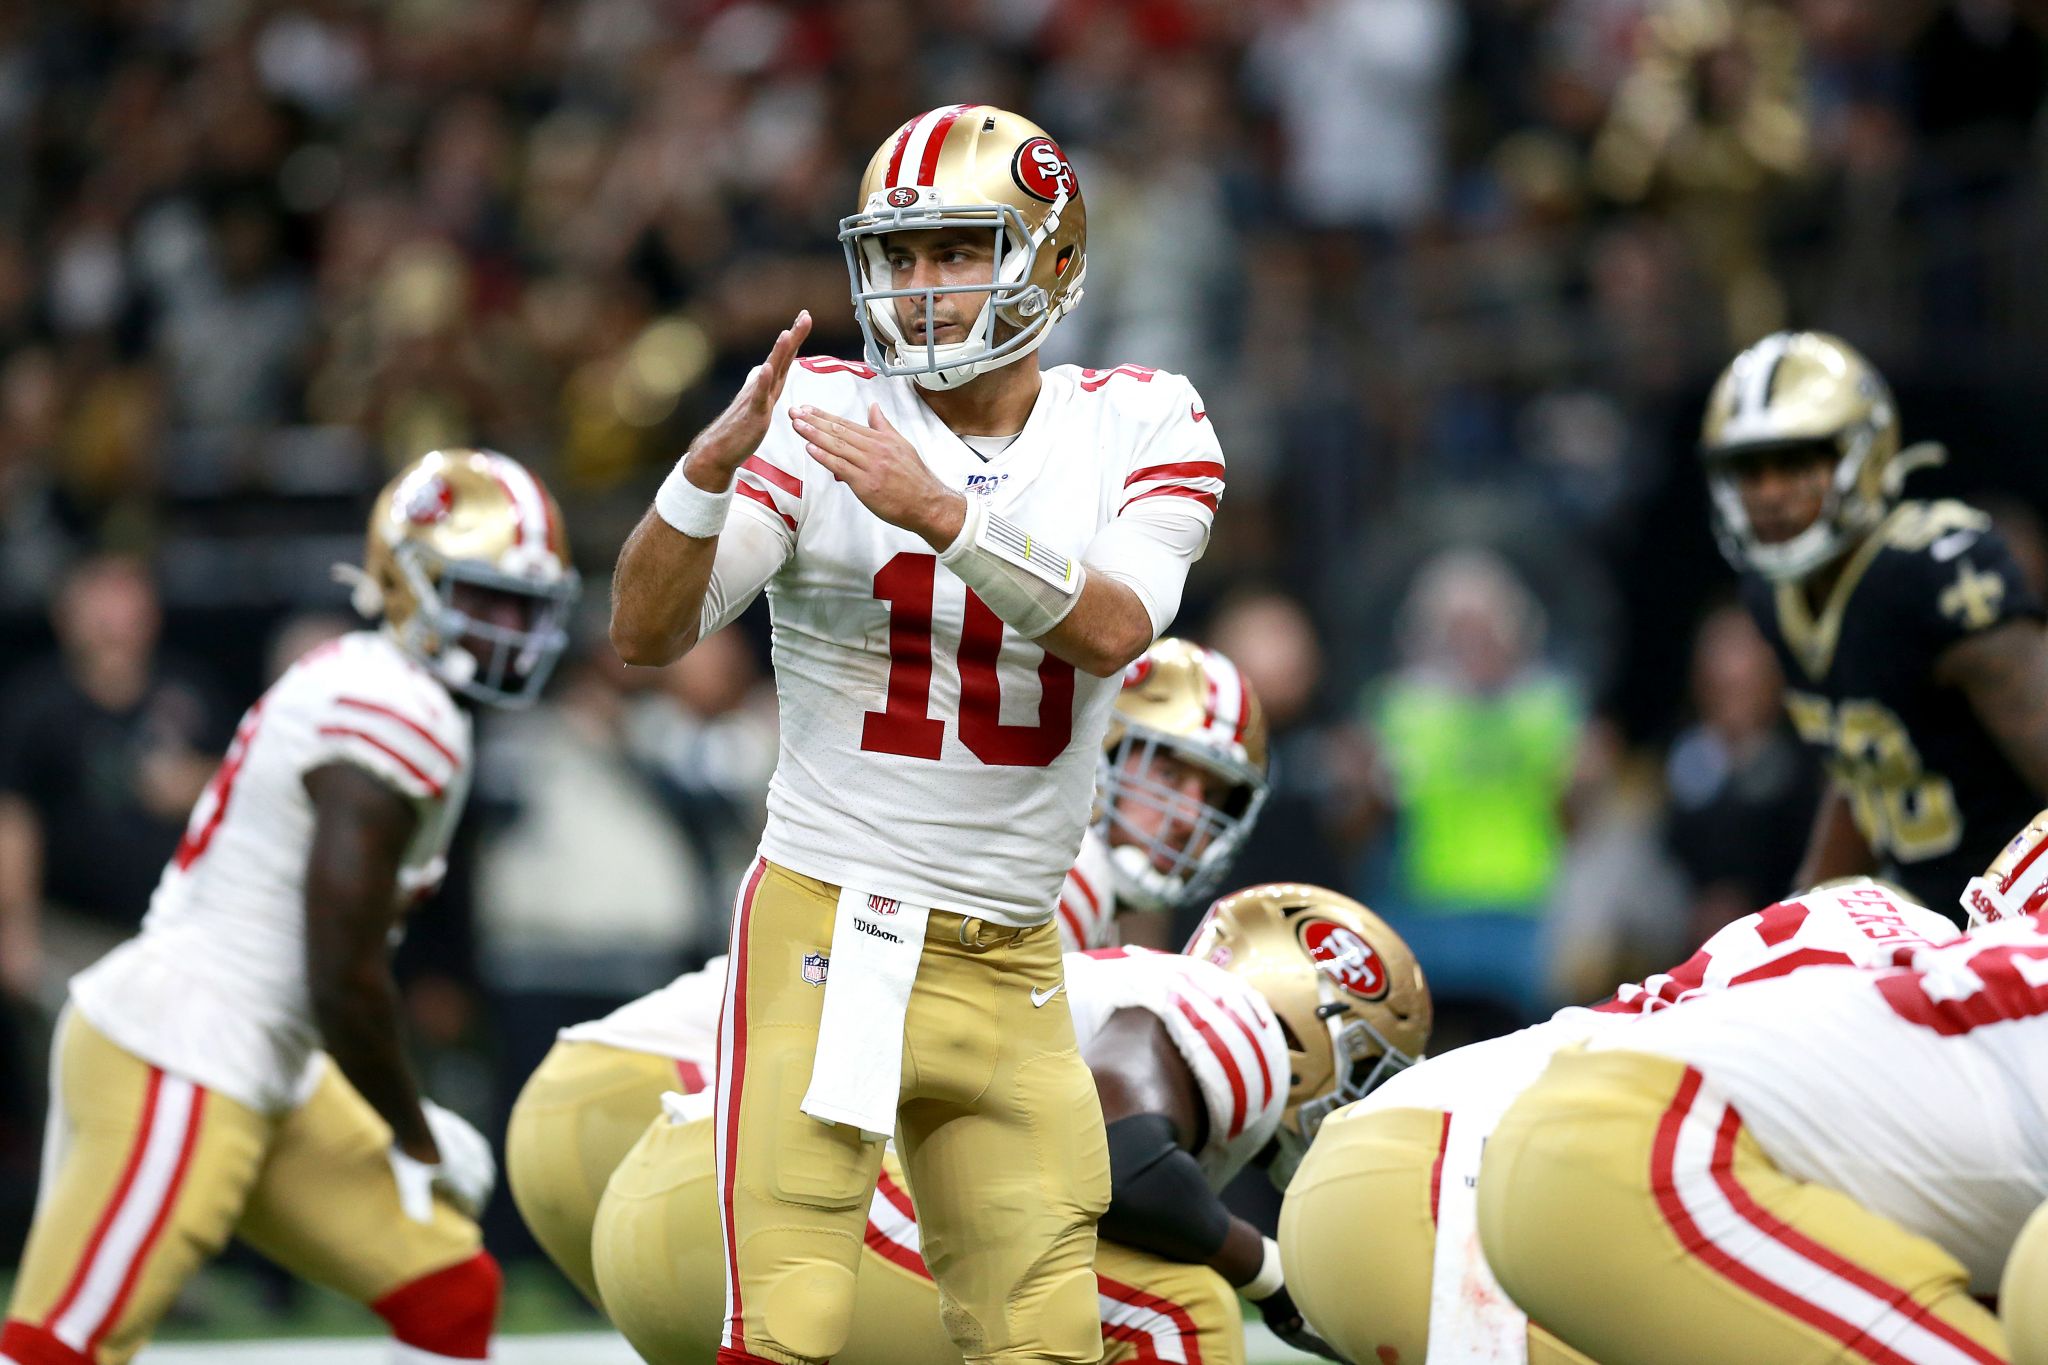 Report: 49ers lobby NFL to wear throwback uniforms in Super Bowl